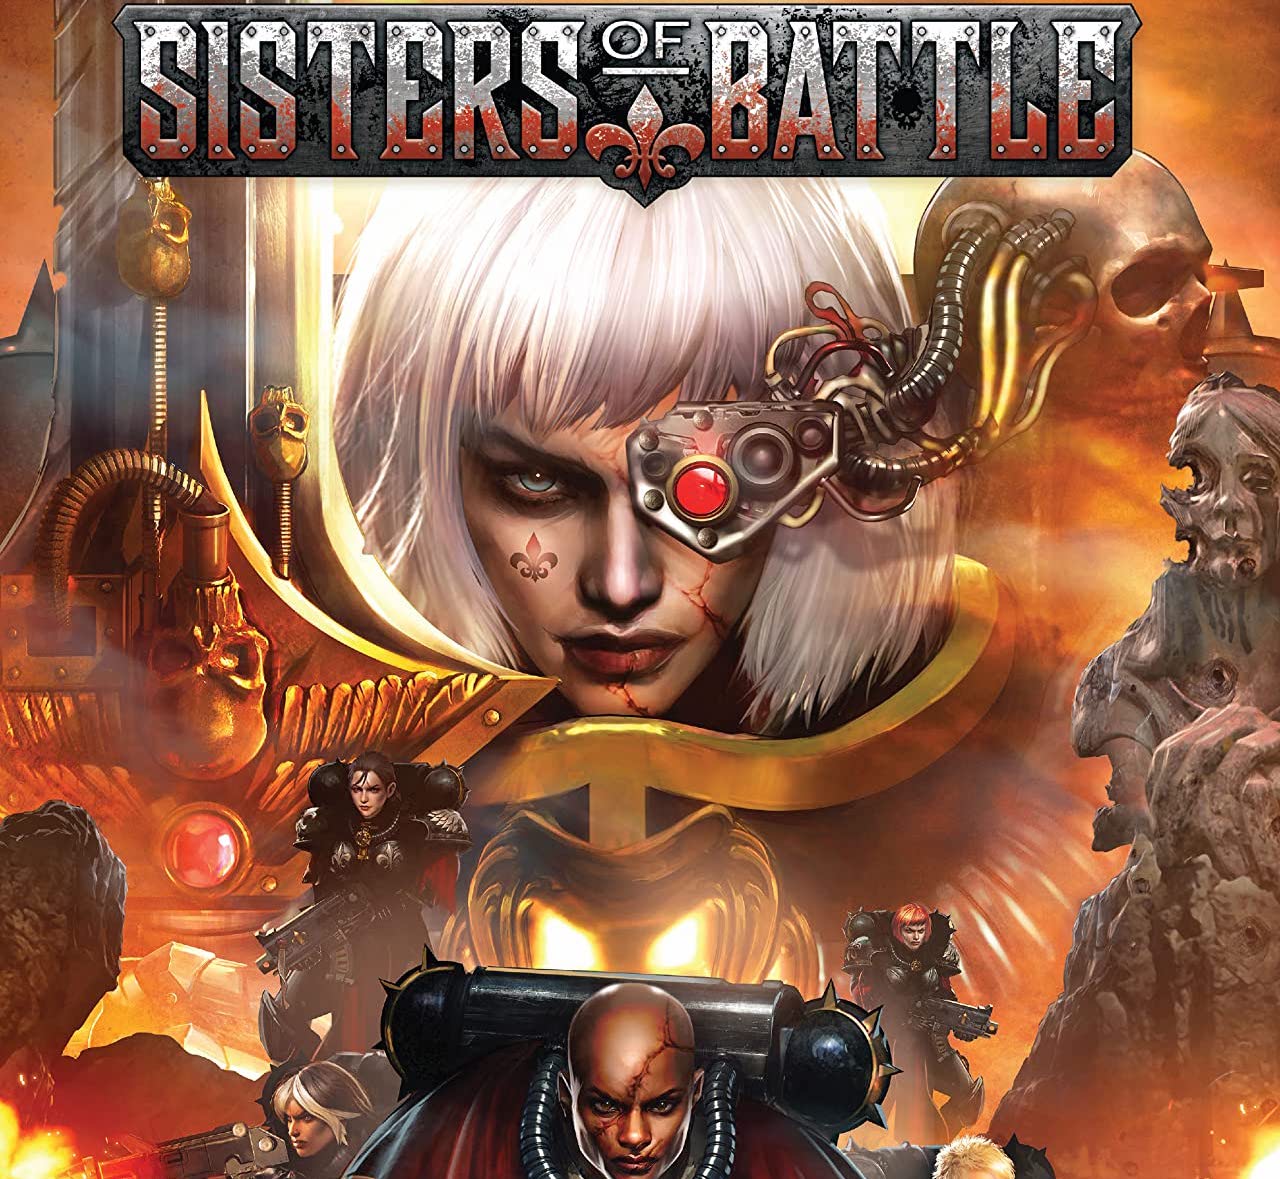 'Warhammer 40,000: Sisters of Battle' #1 drops you into a compelling battle